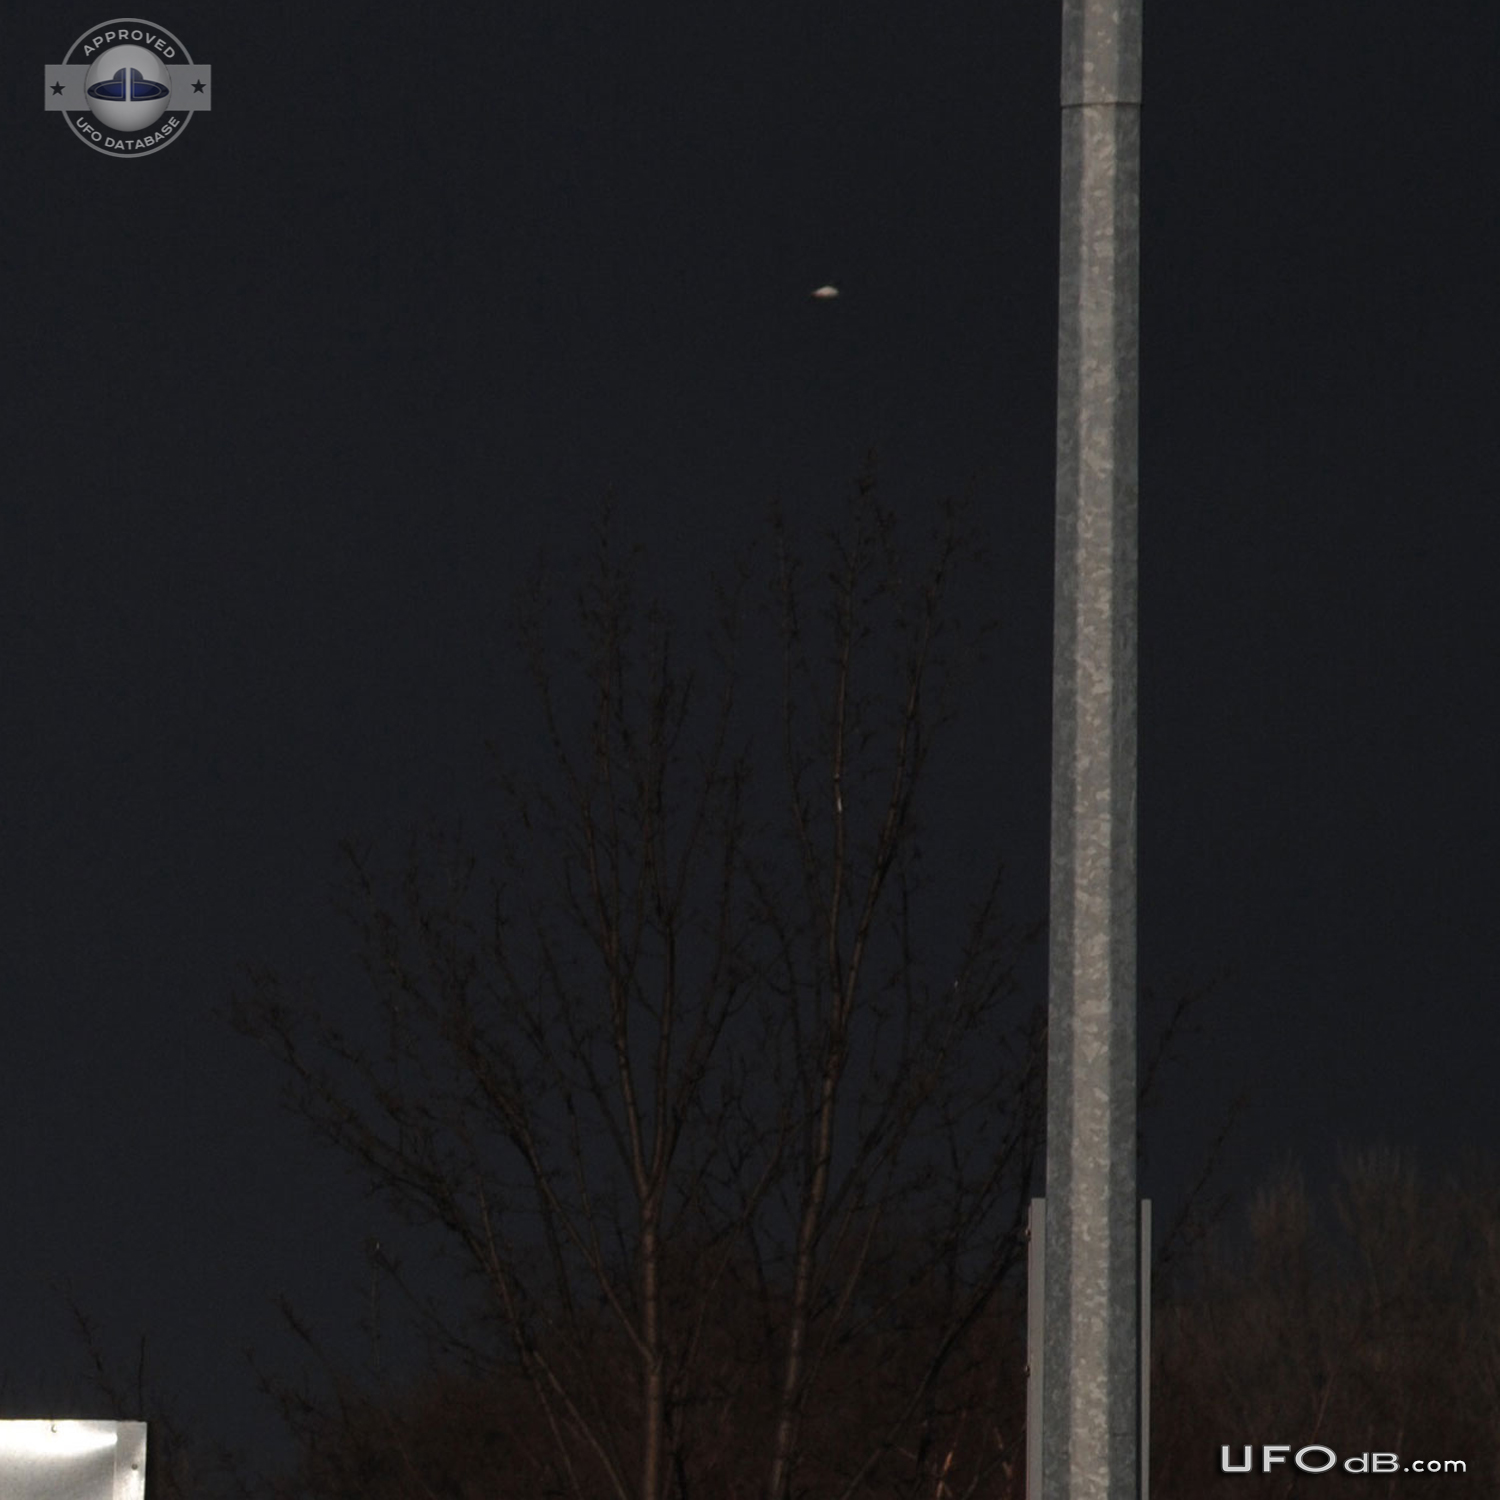 Saucer UFO appear on Soccer Game picture in Liverpool UK 2015 UFO Picture #626-2